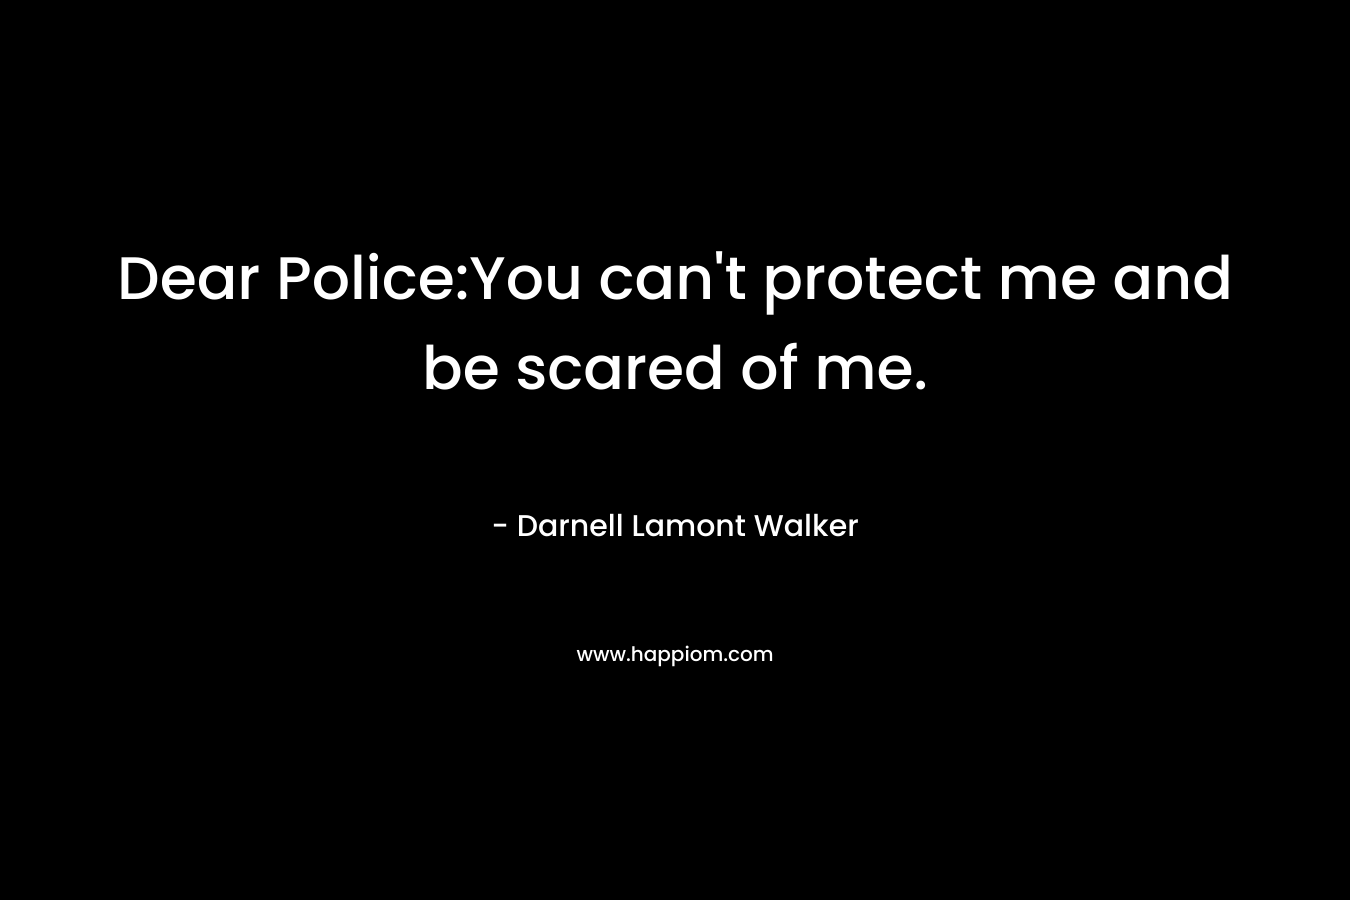 Dear Police:You can't protect me and be scared of me.